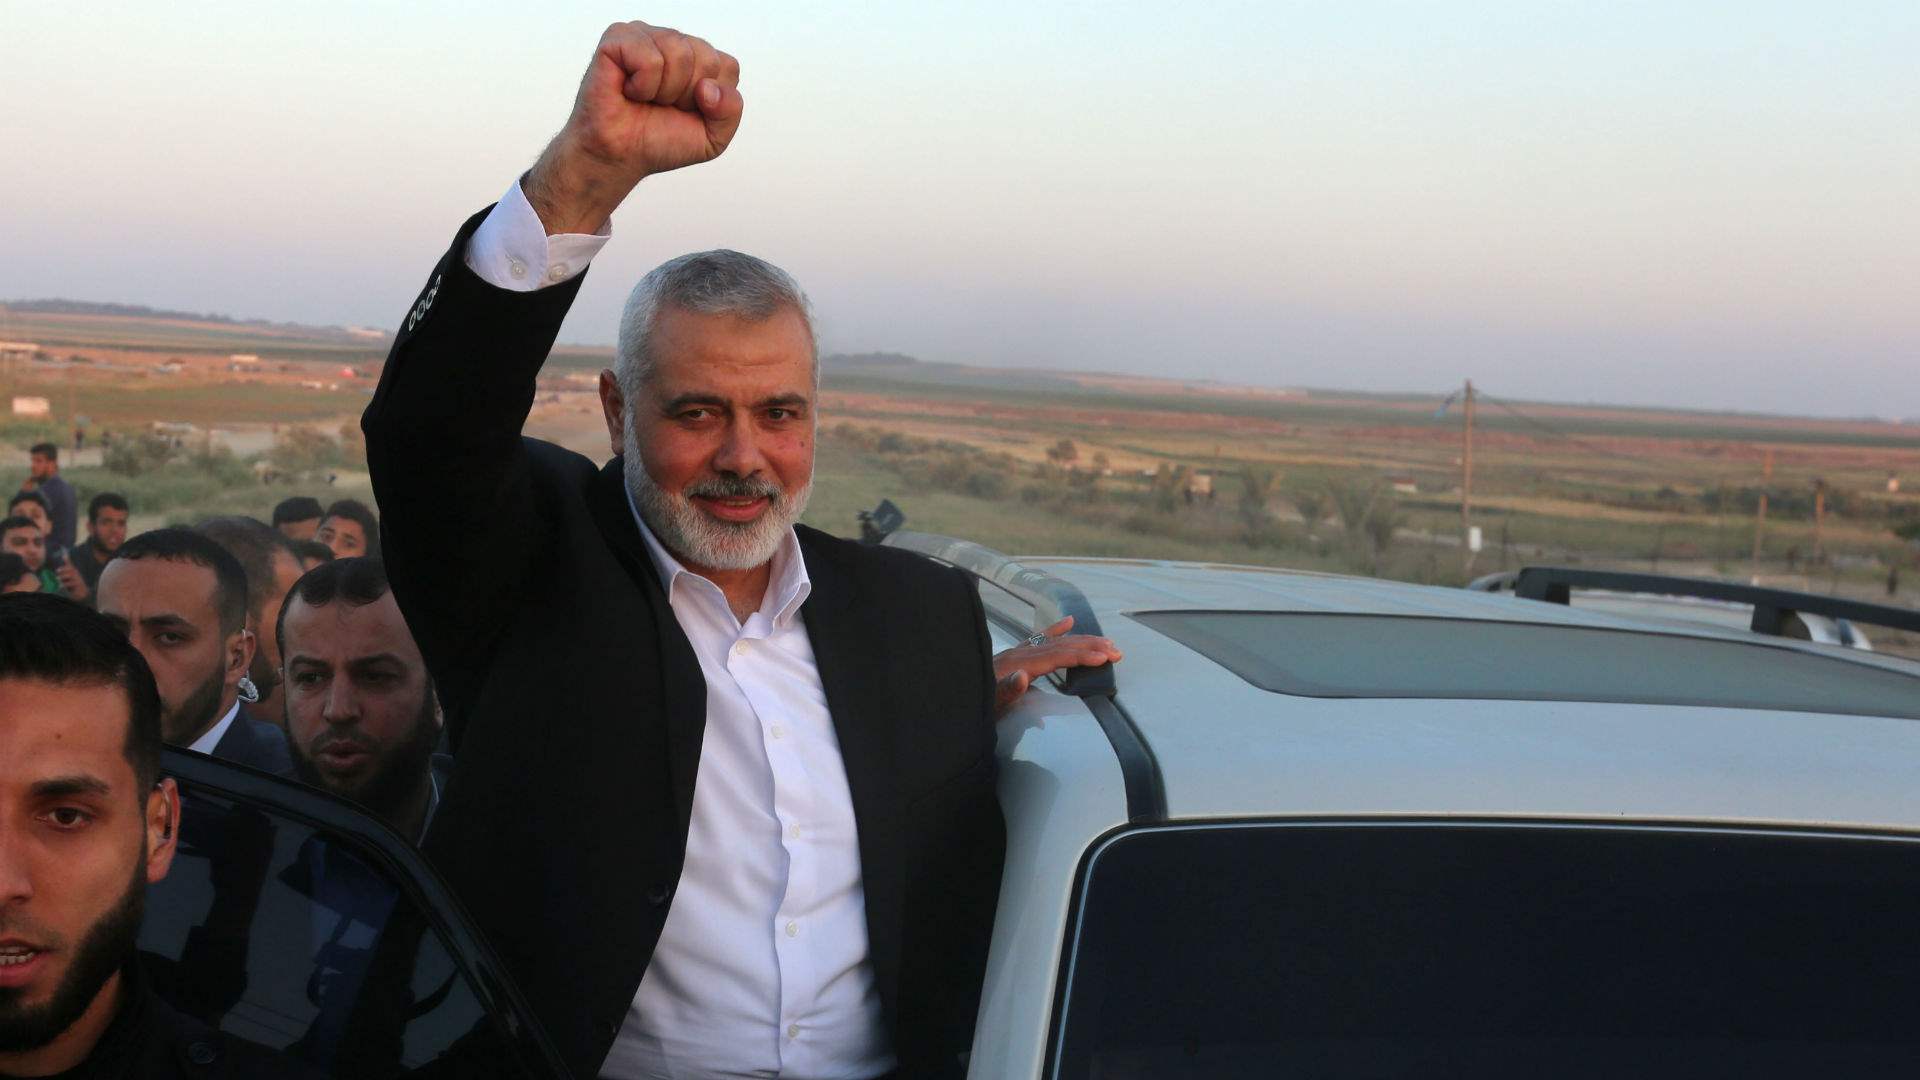 Hamas&#39; Ismail Haniyeh assassinated in Tehran: Details of deadly Israeli attack emerge